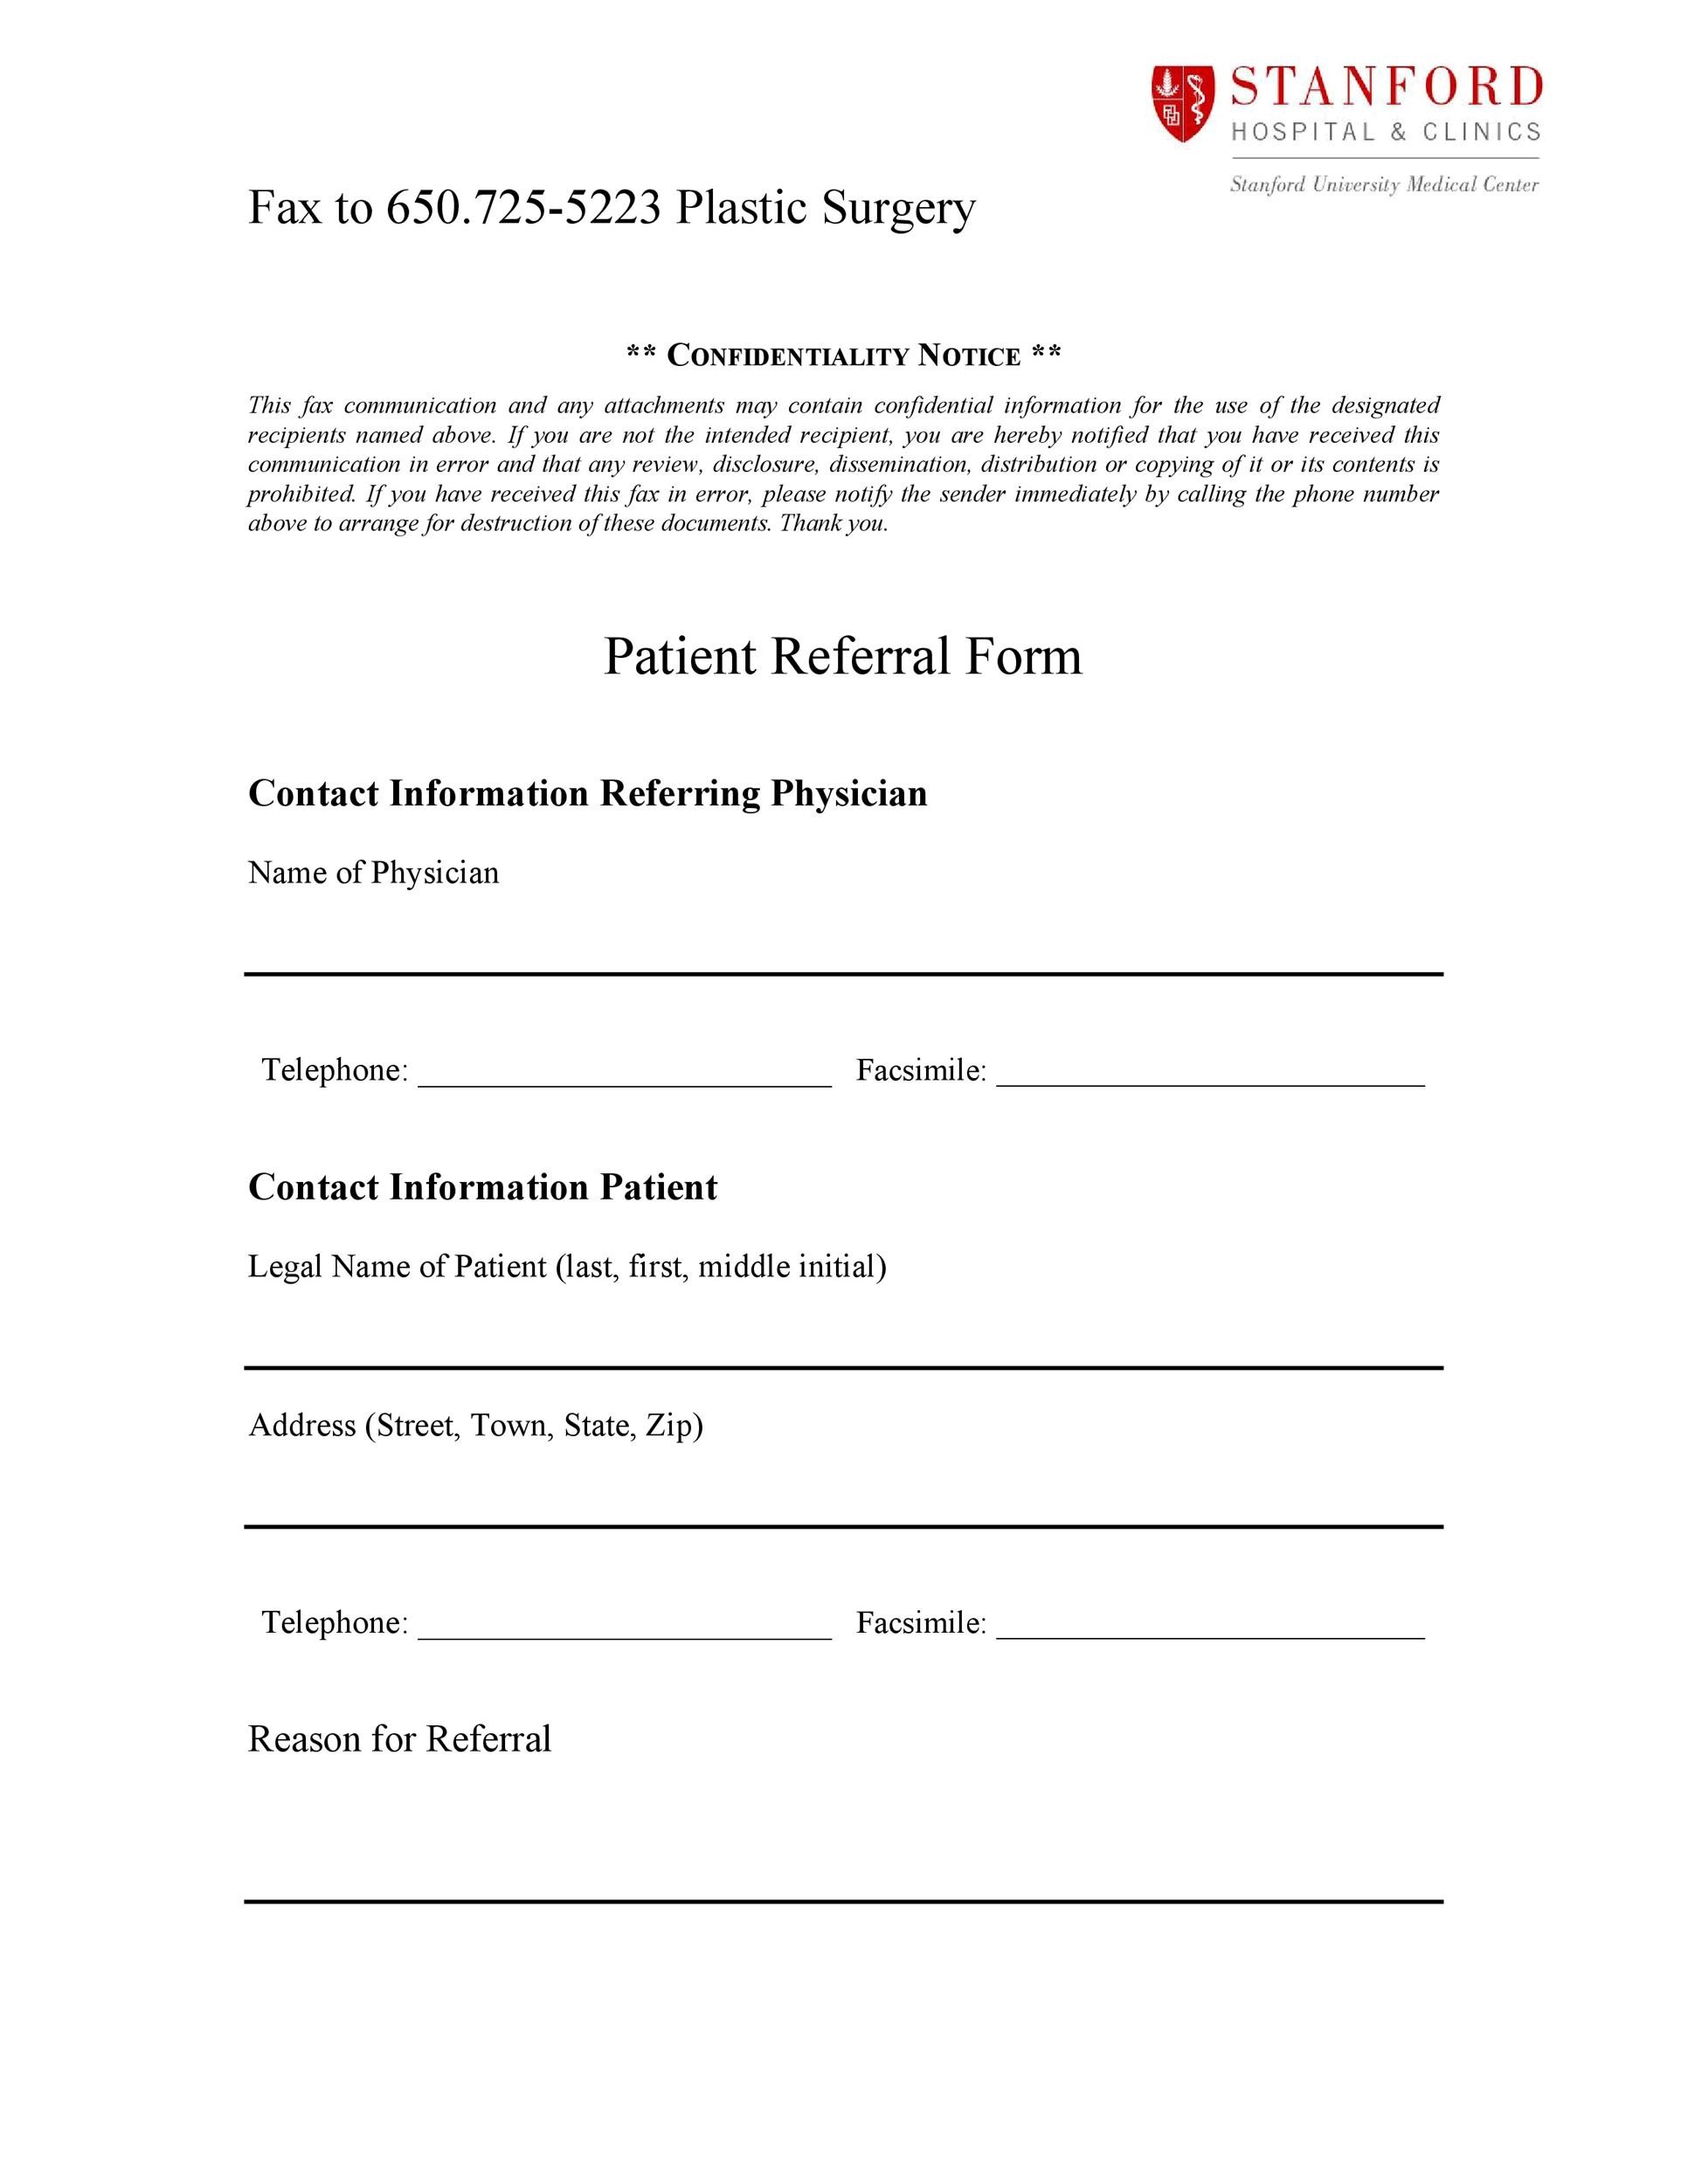 Free referral form template 29